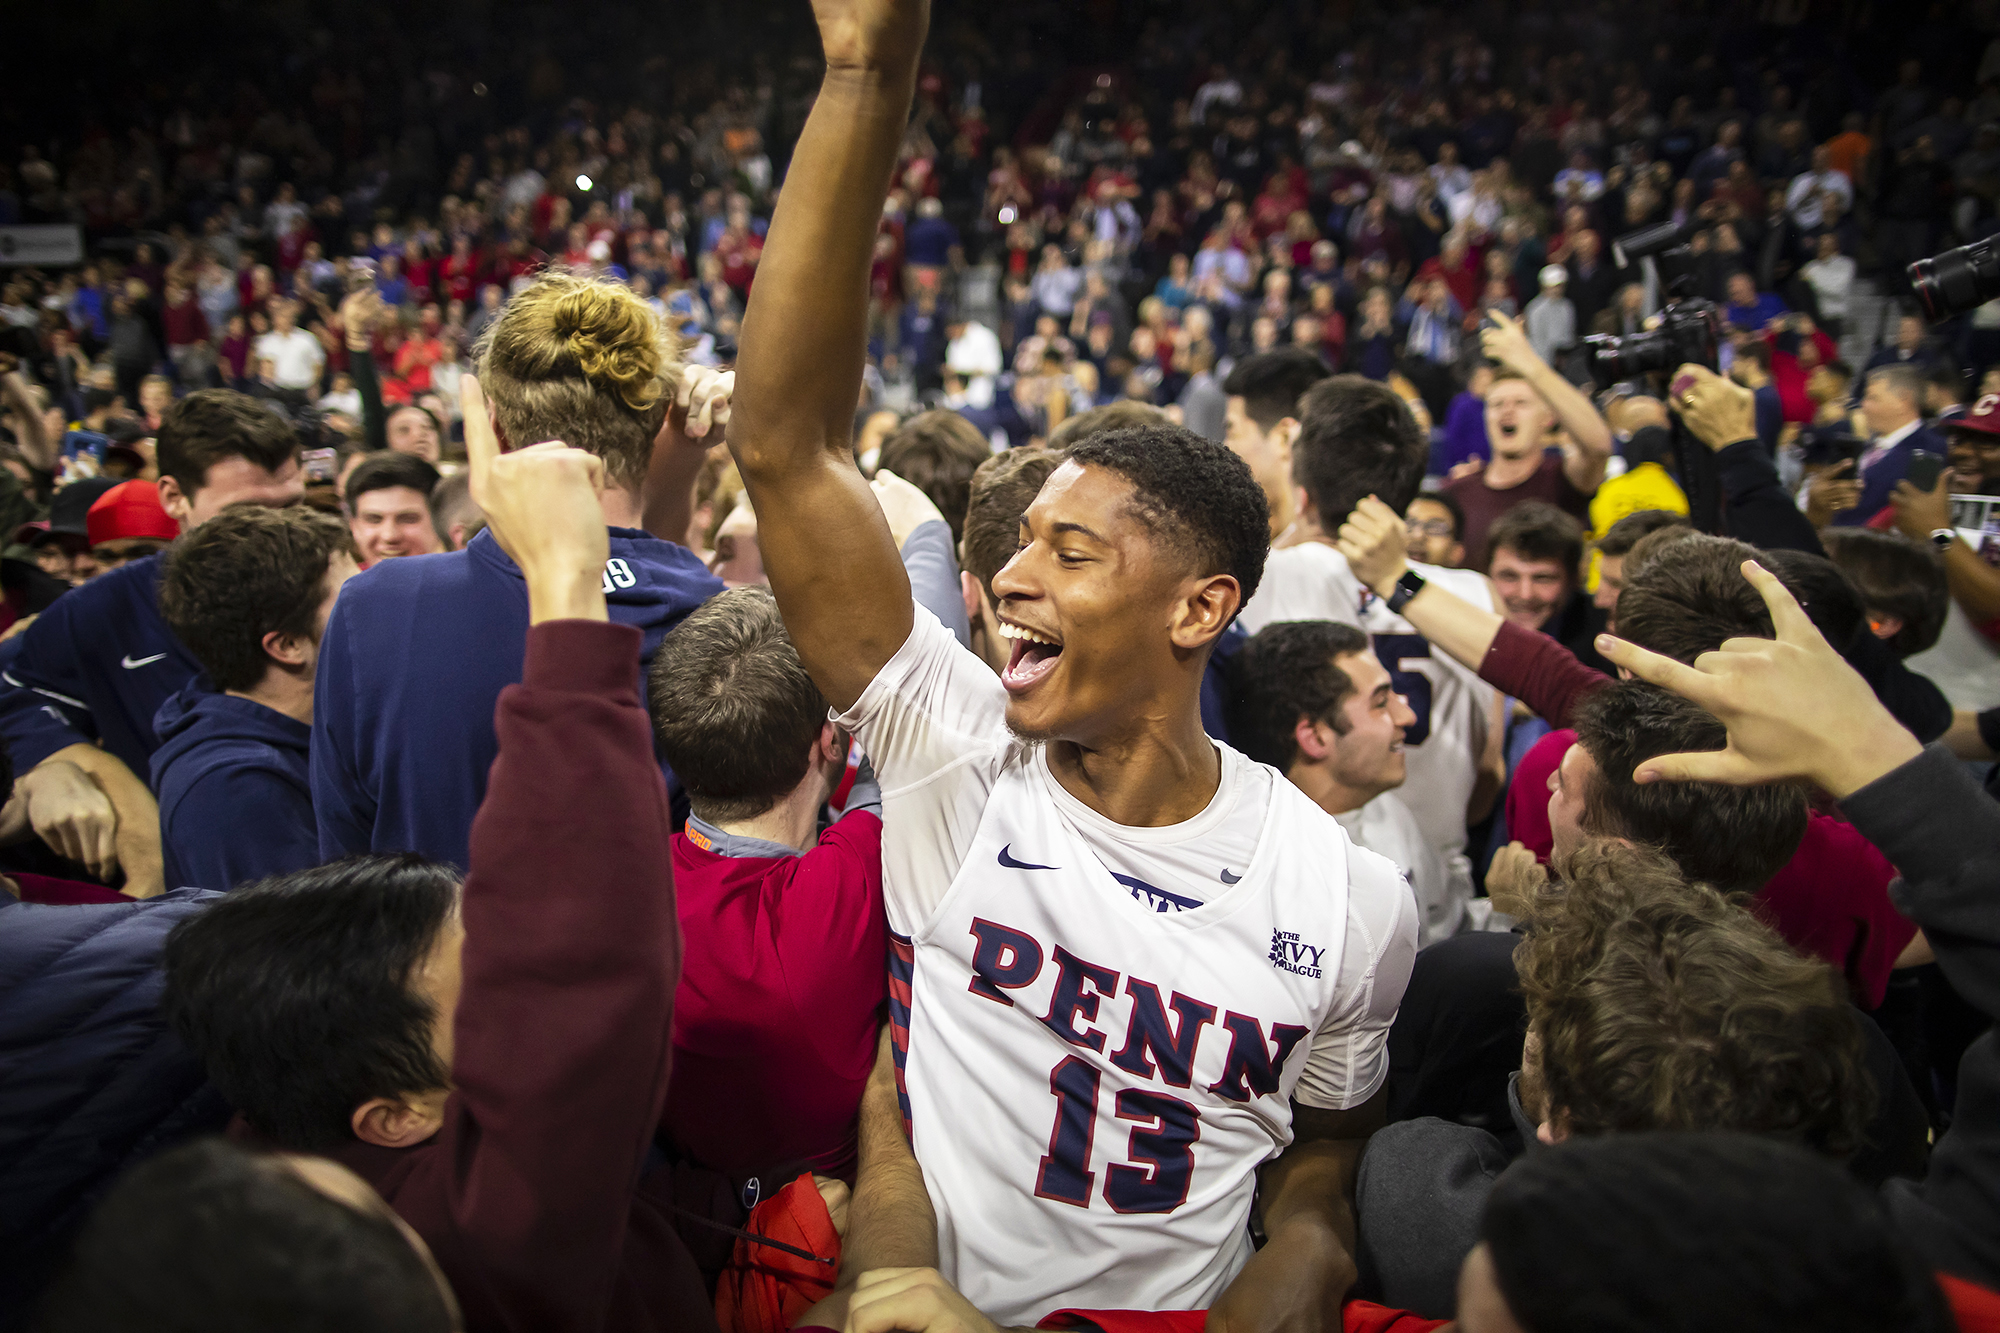 Penn basketball players and fans celebrate on the court after beating Villanova